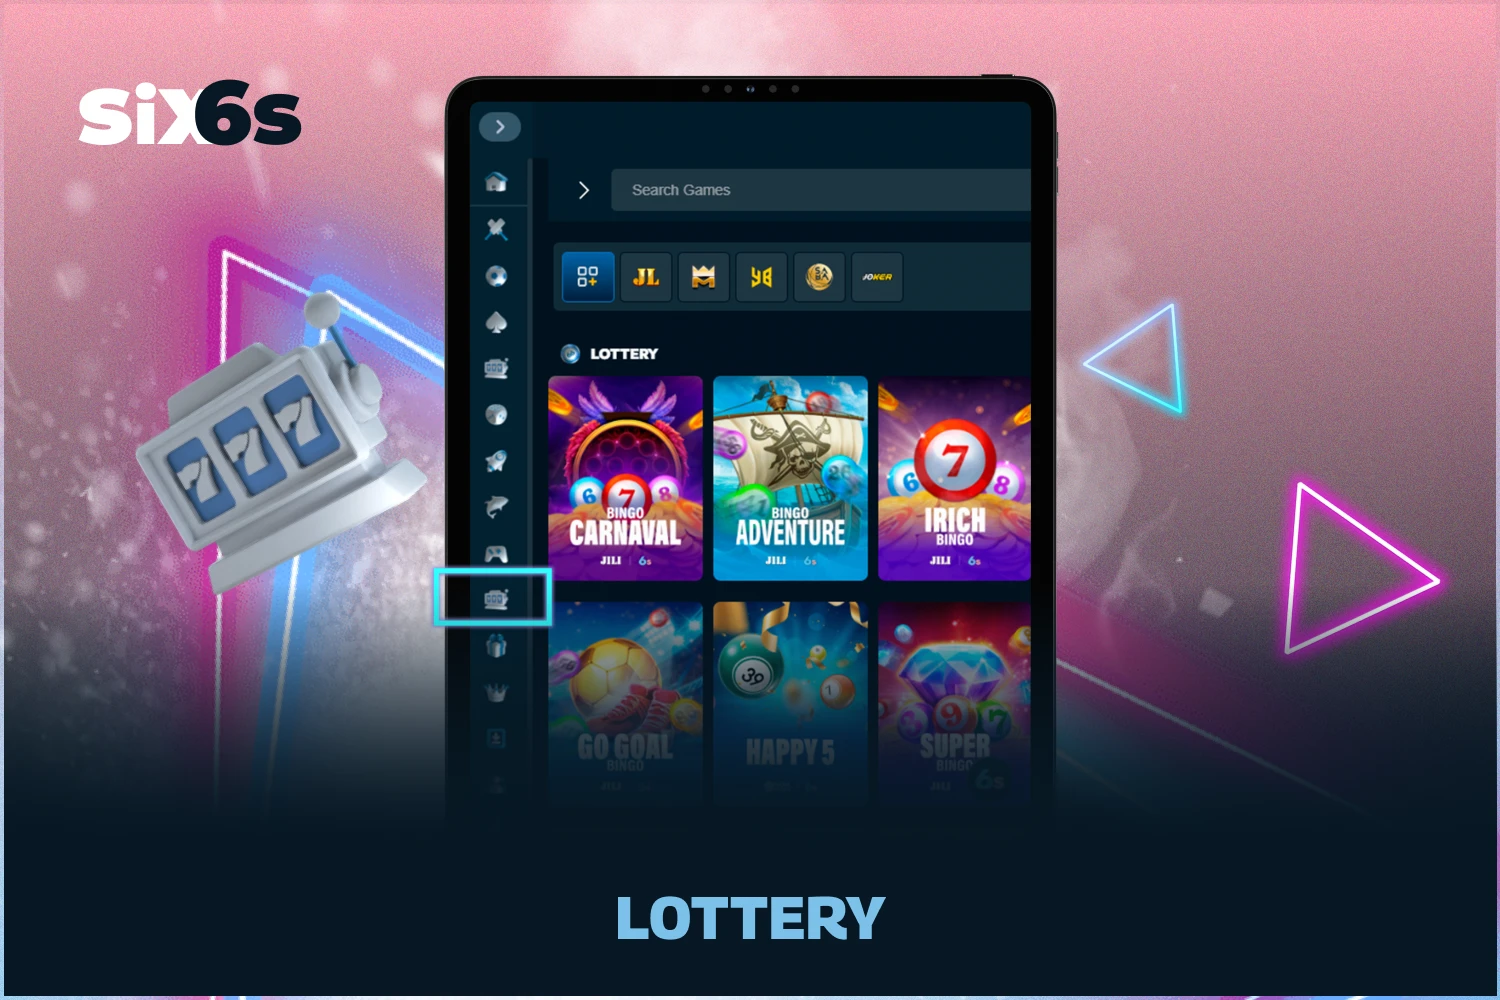 Six6s Casino's Lotteries section features games that are popular among Bangladeshi players